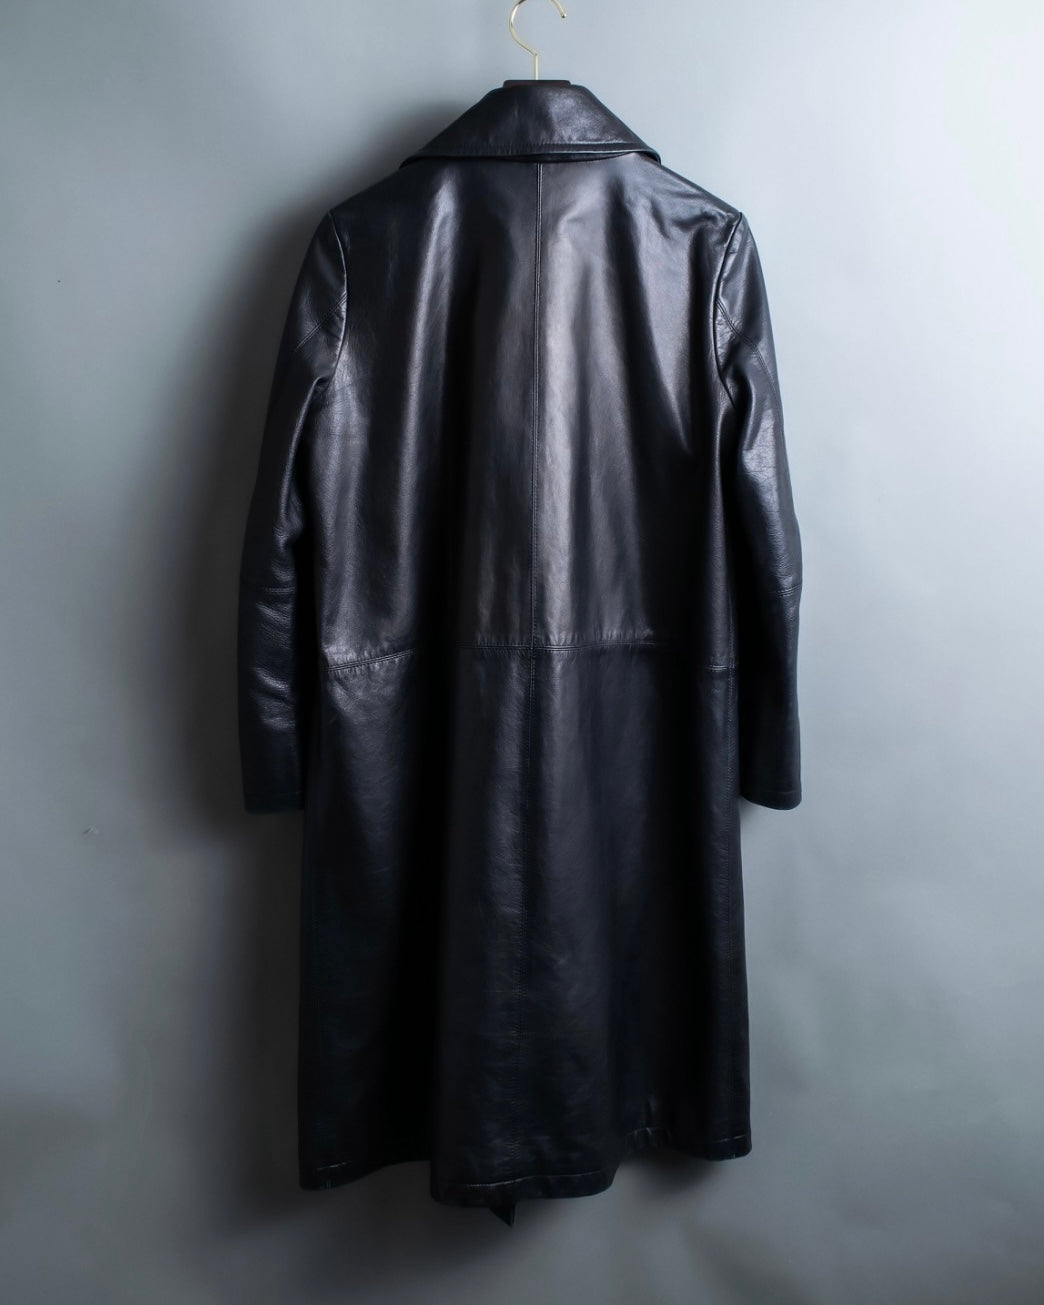 "Issey Miyake" Archive leather coat